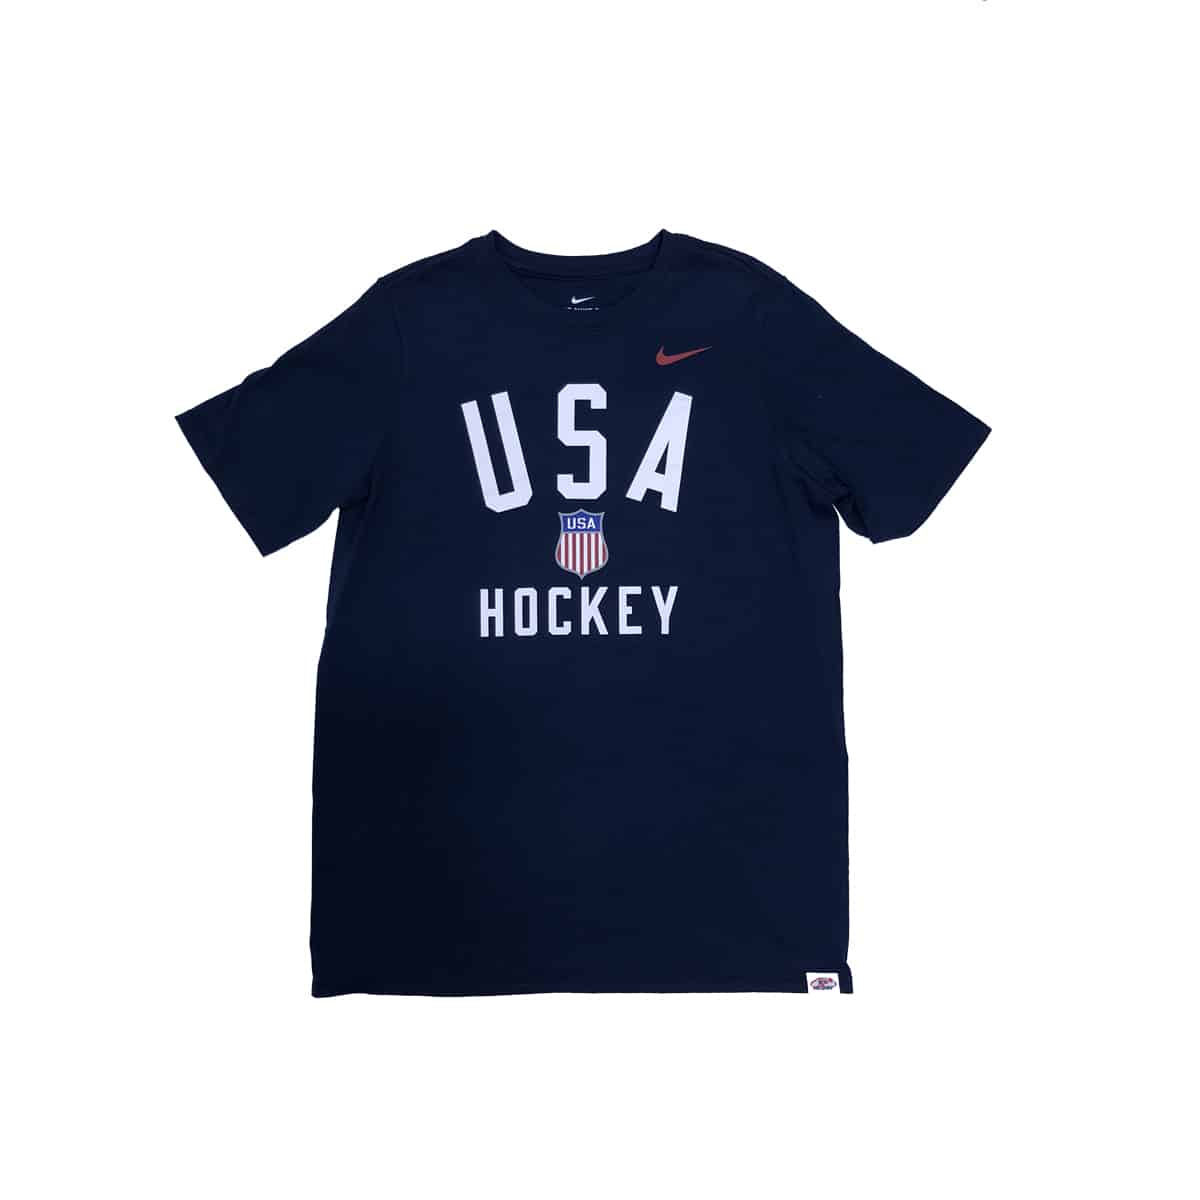 USA Hockey Nike Athletic Tee for Youth